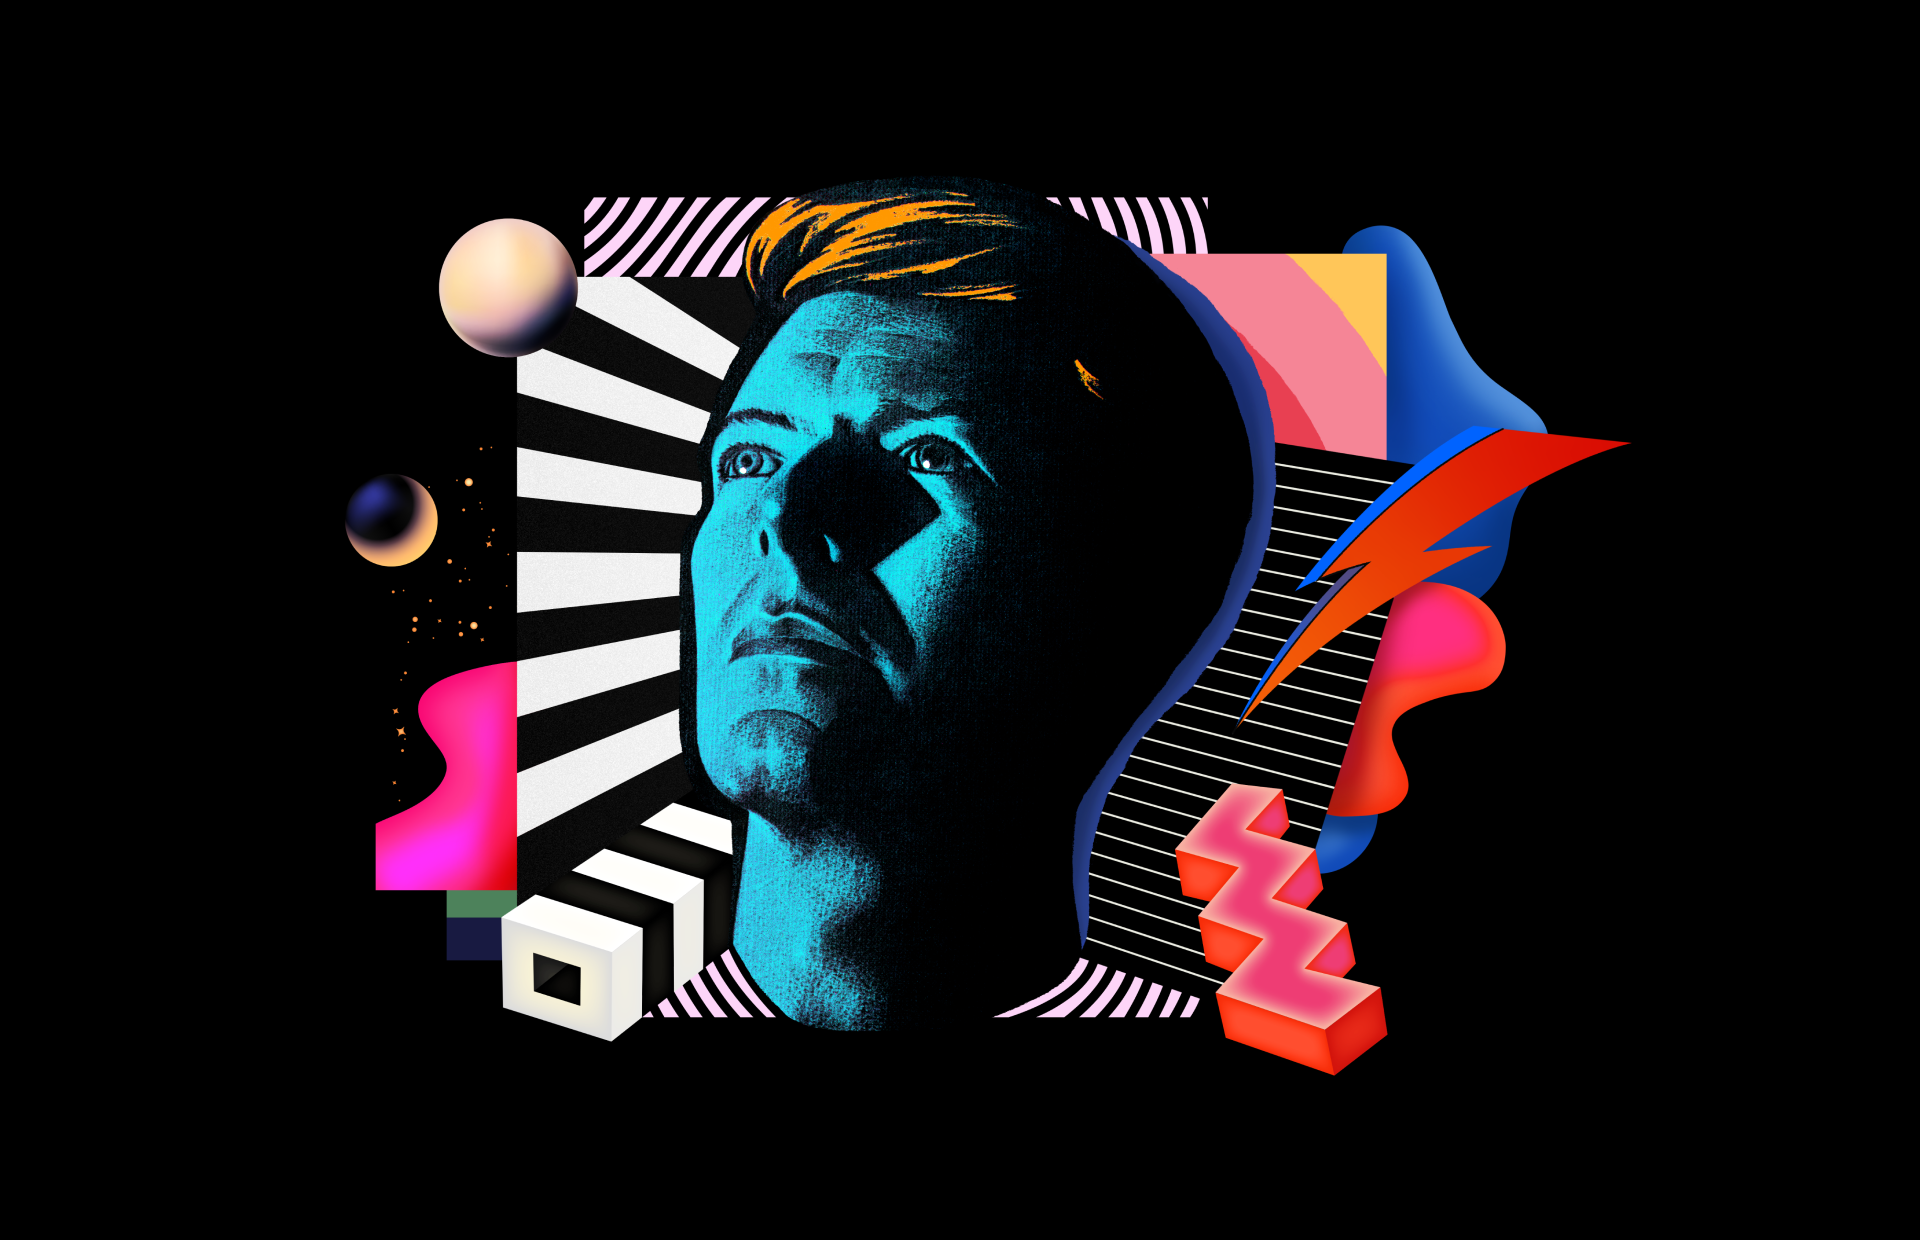 Graphic design poster featuring David Bowie with colour and shapes